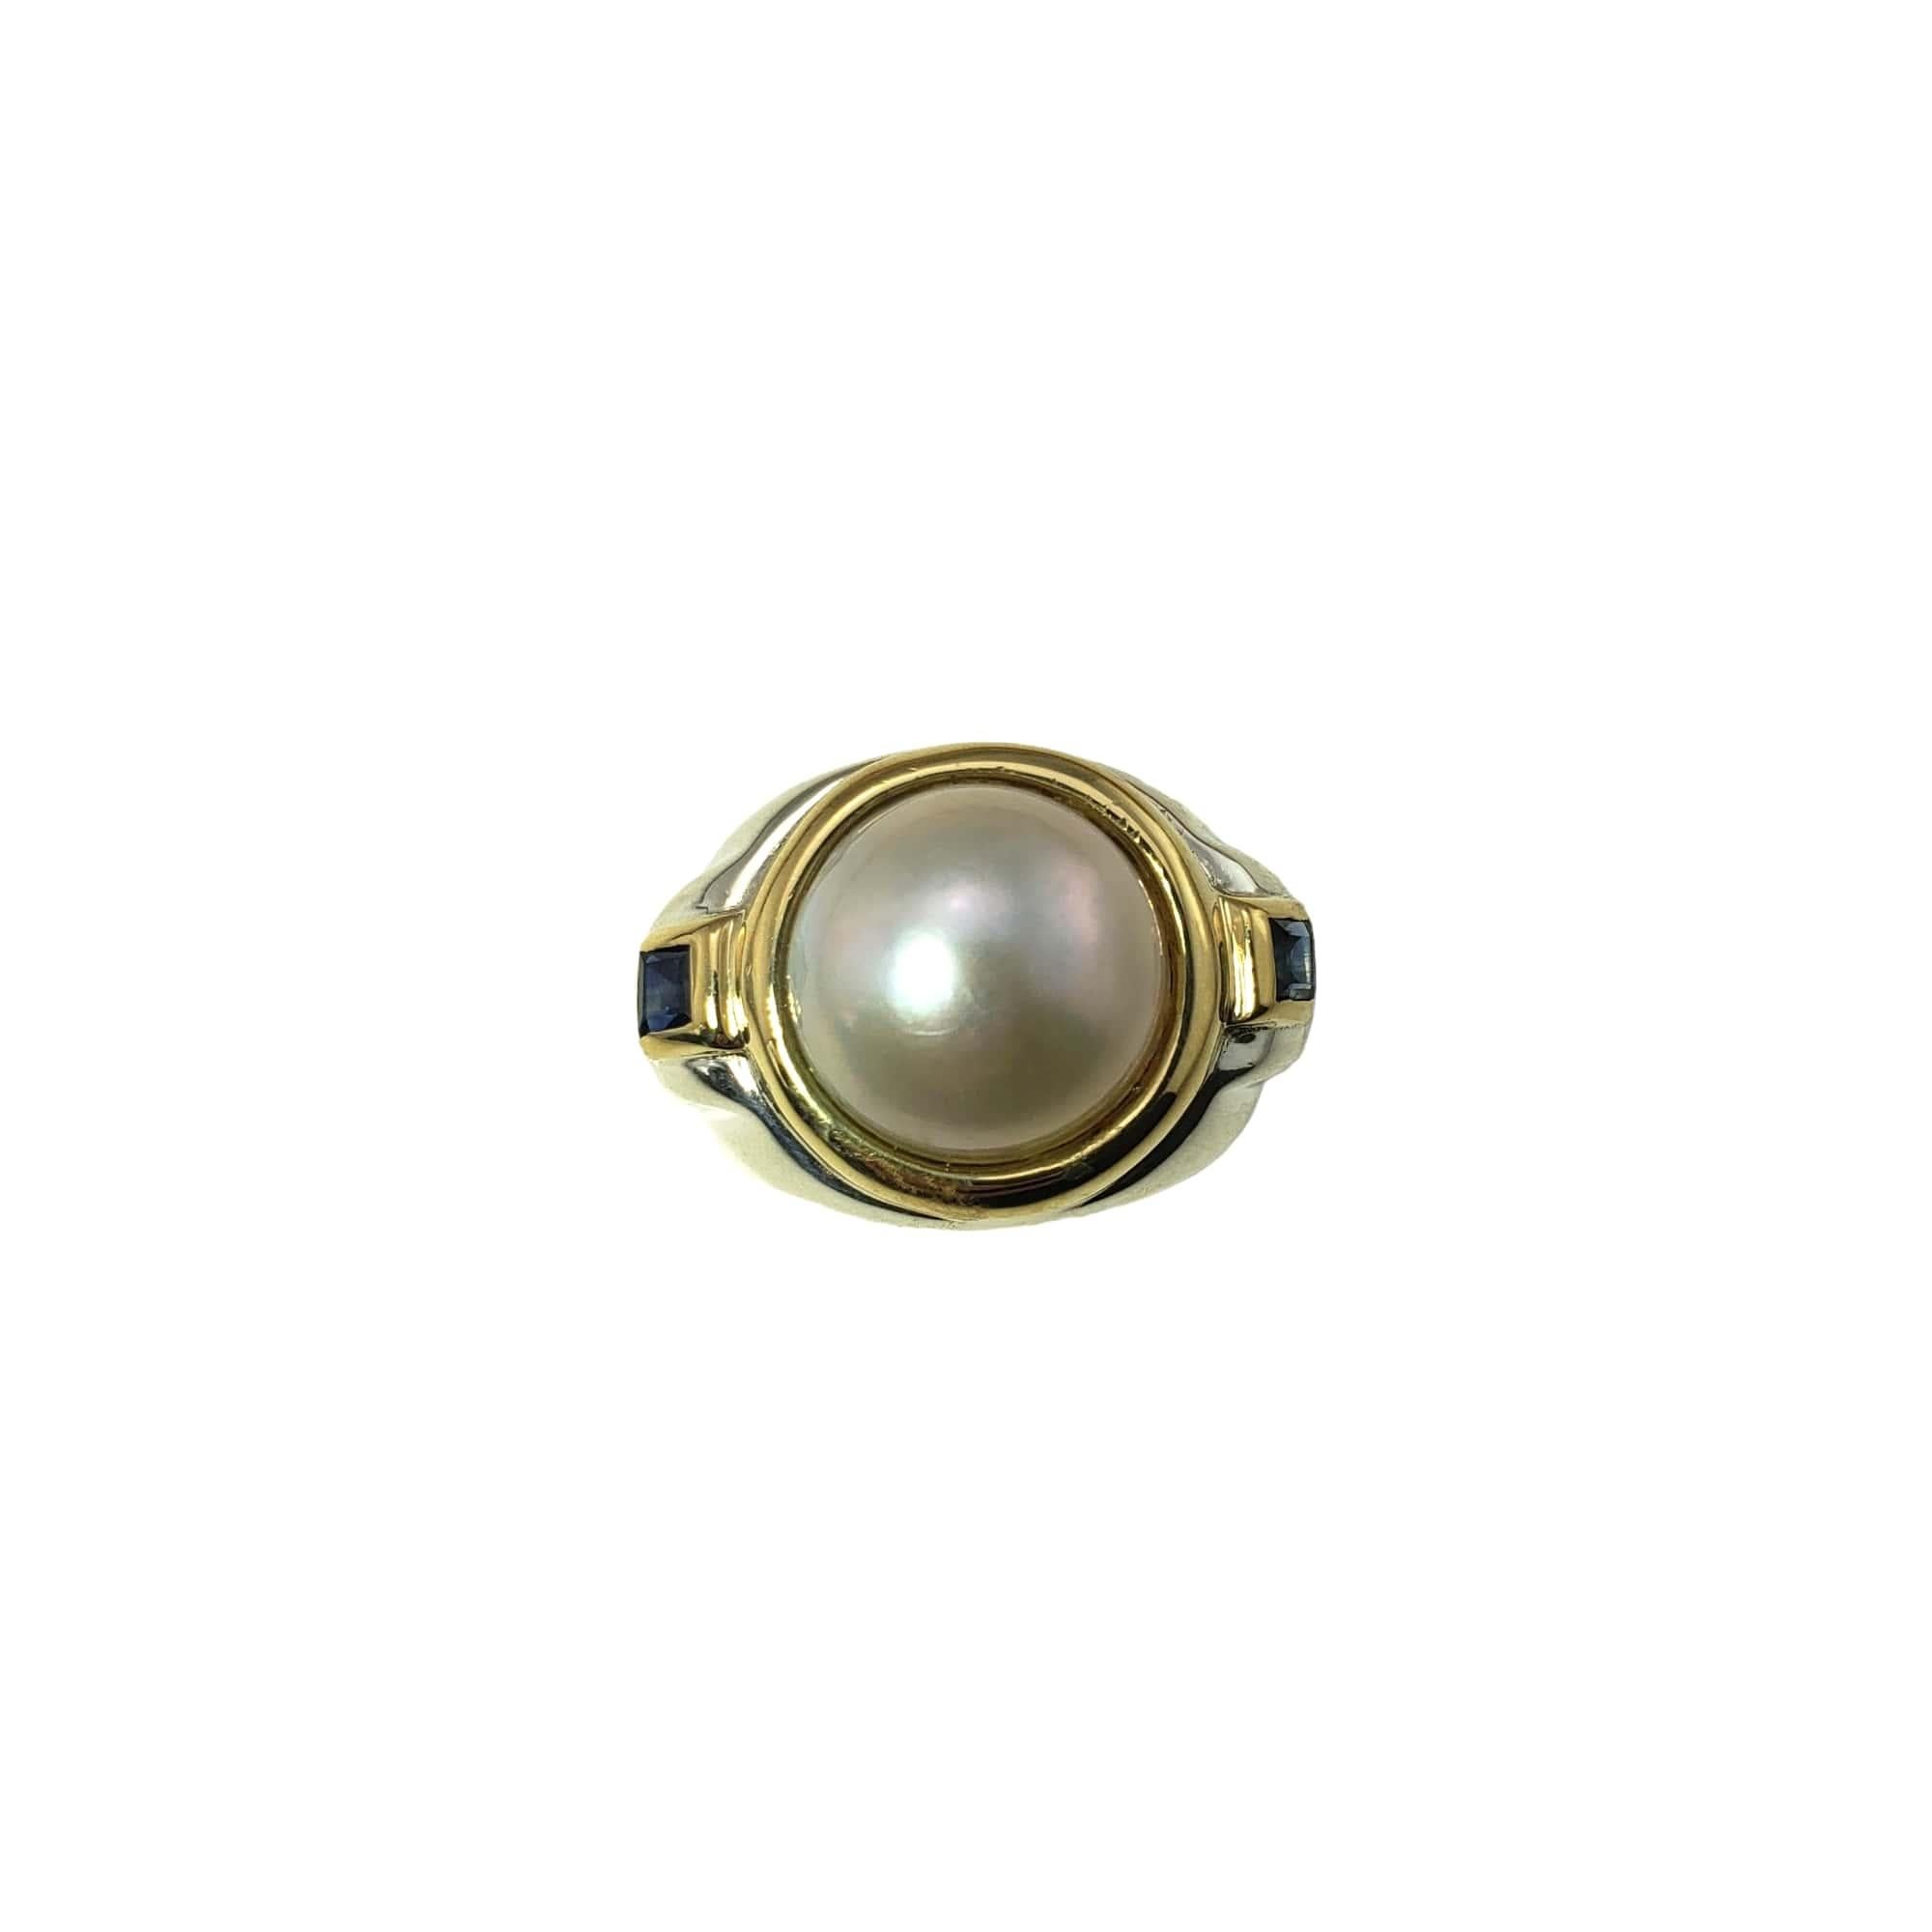 Vintage Tiffany & Co. Sterling Silver and 18 Karat Yellow Gold Mabe Pearl and Sapphire Ring Size 5.75-

This lovely ring by Tiffany & Co. features one Mabe pearl (12 mm) and two square sapphires set in sterling silver and 18K yellow gold. Width: 17